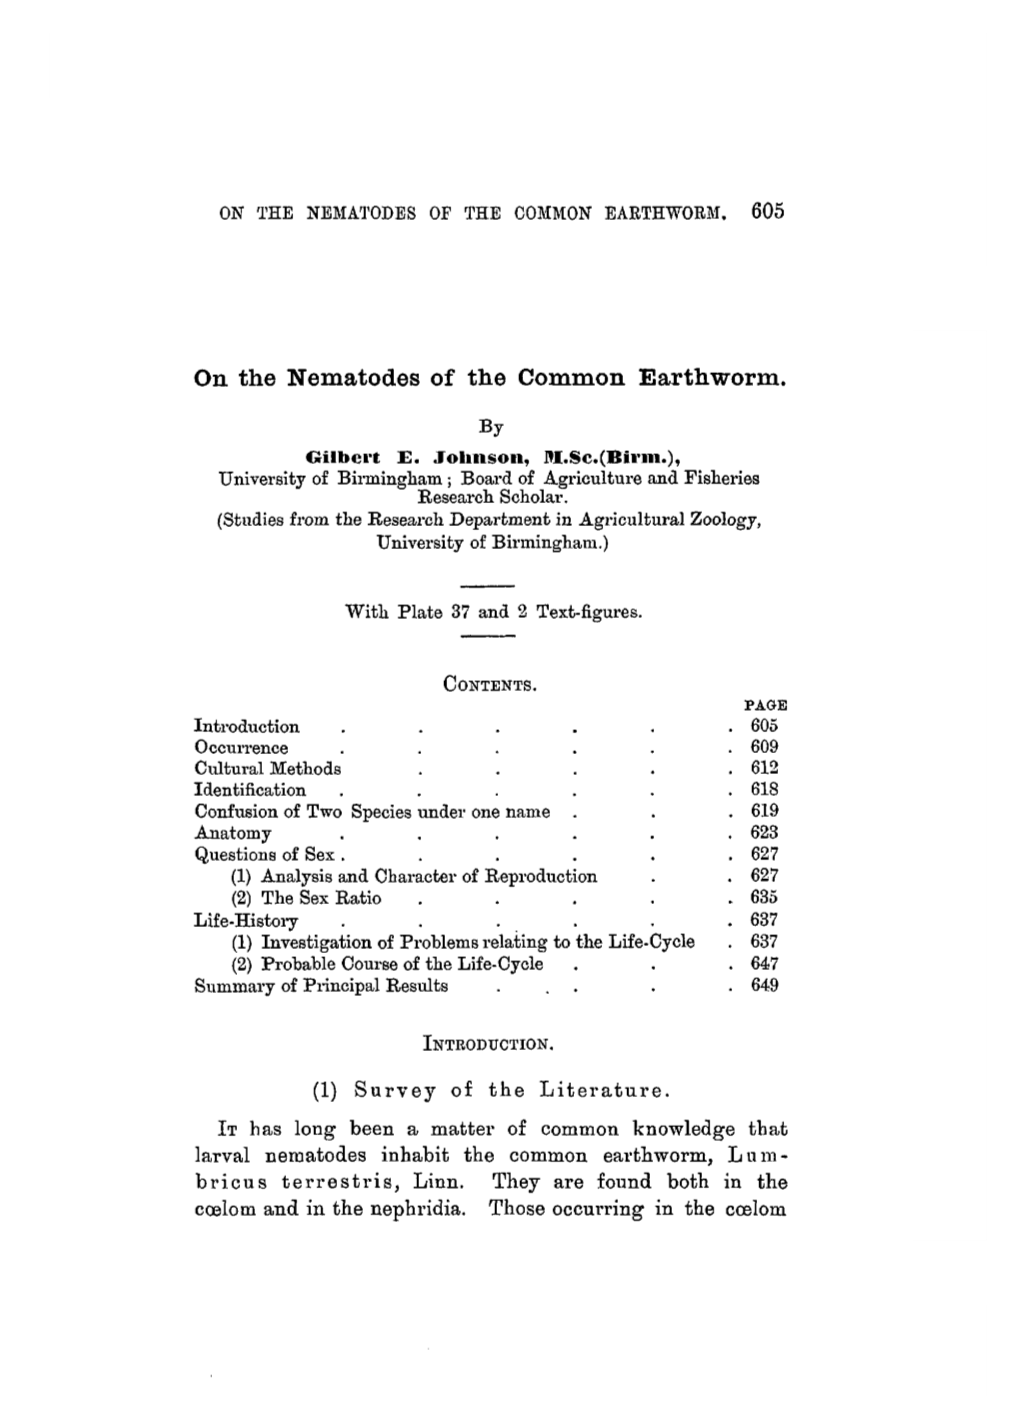 On the Nematodes of the Common Earthworm. by Gilbert E